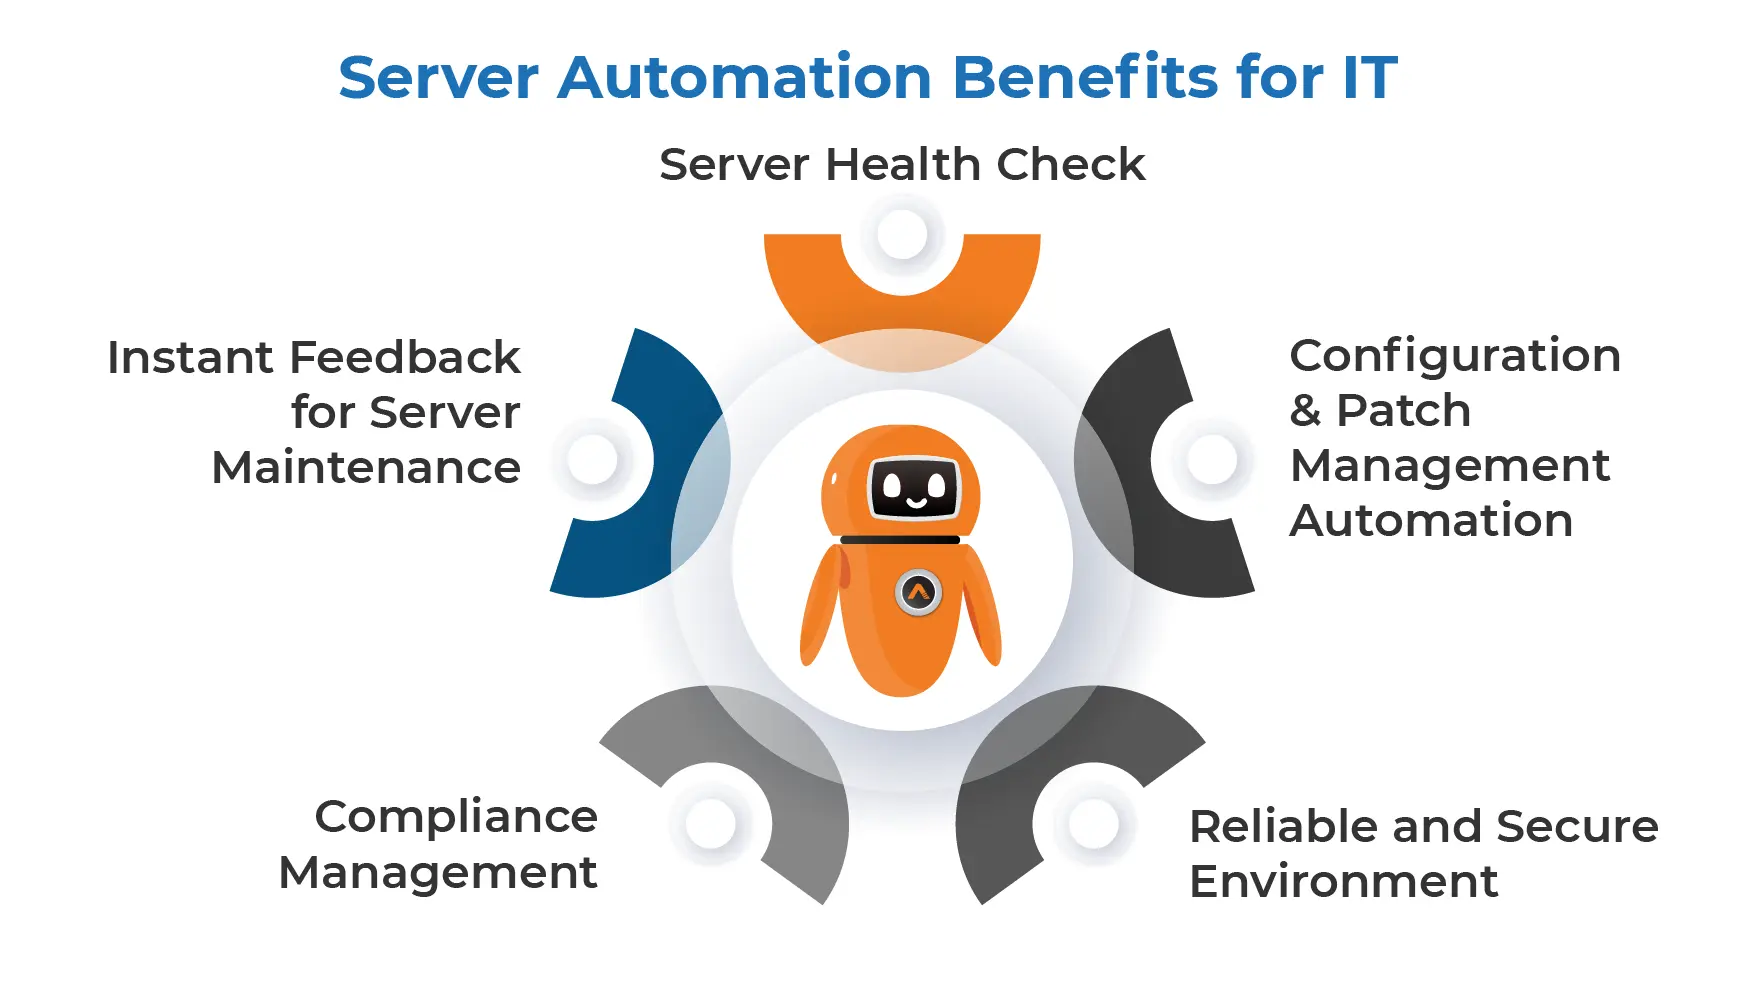 Benefits of Server Automation